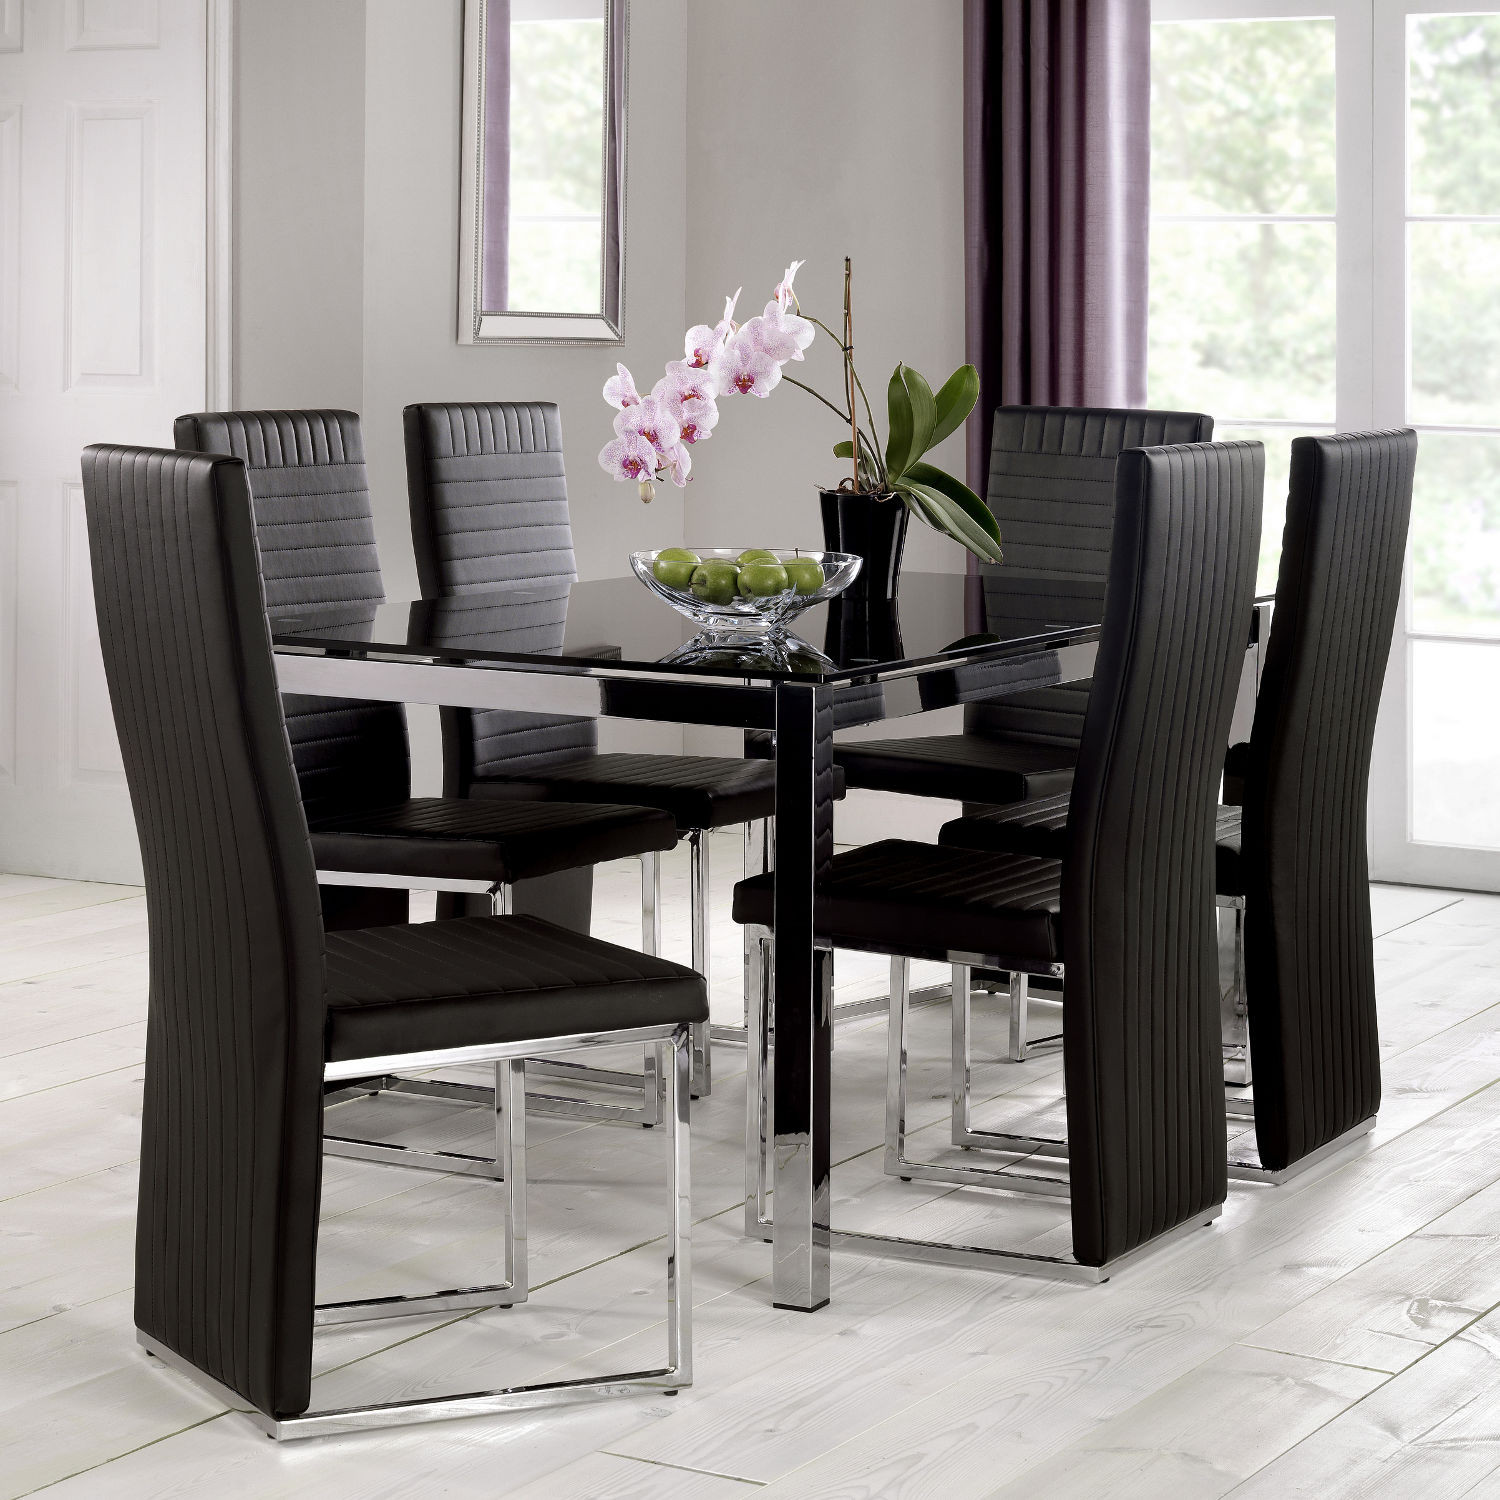 Best ideas about Black Dining Table
. Save or Pin Decorating Black Dining Table Set Now.